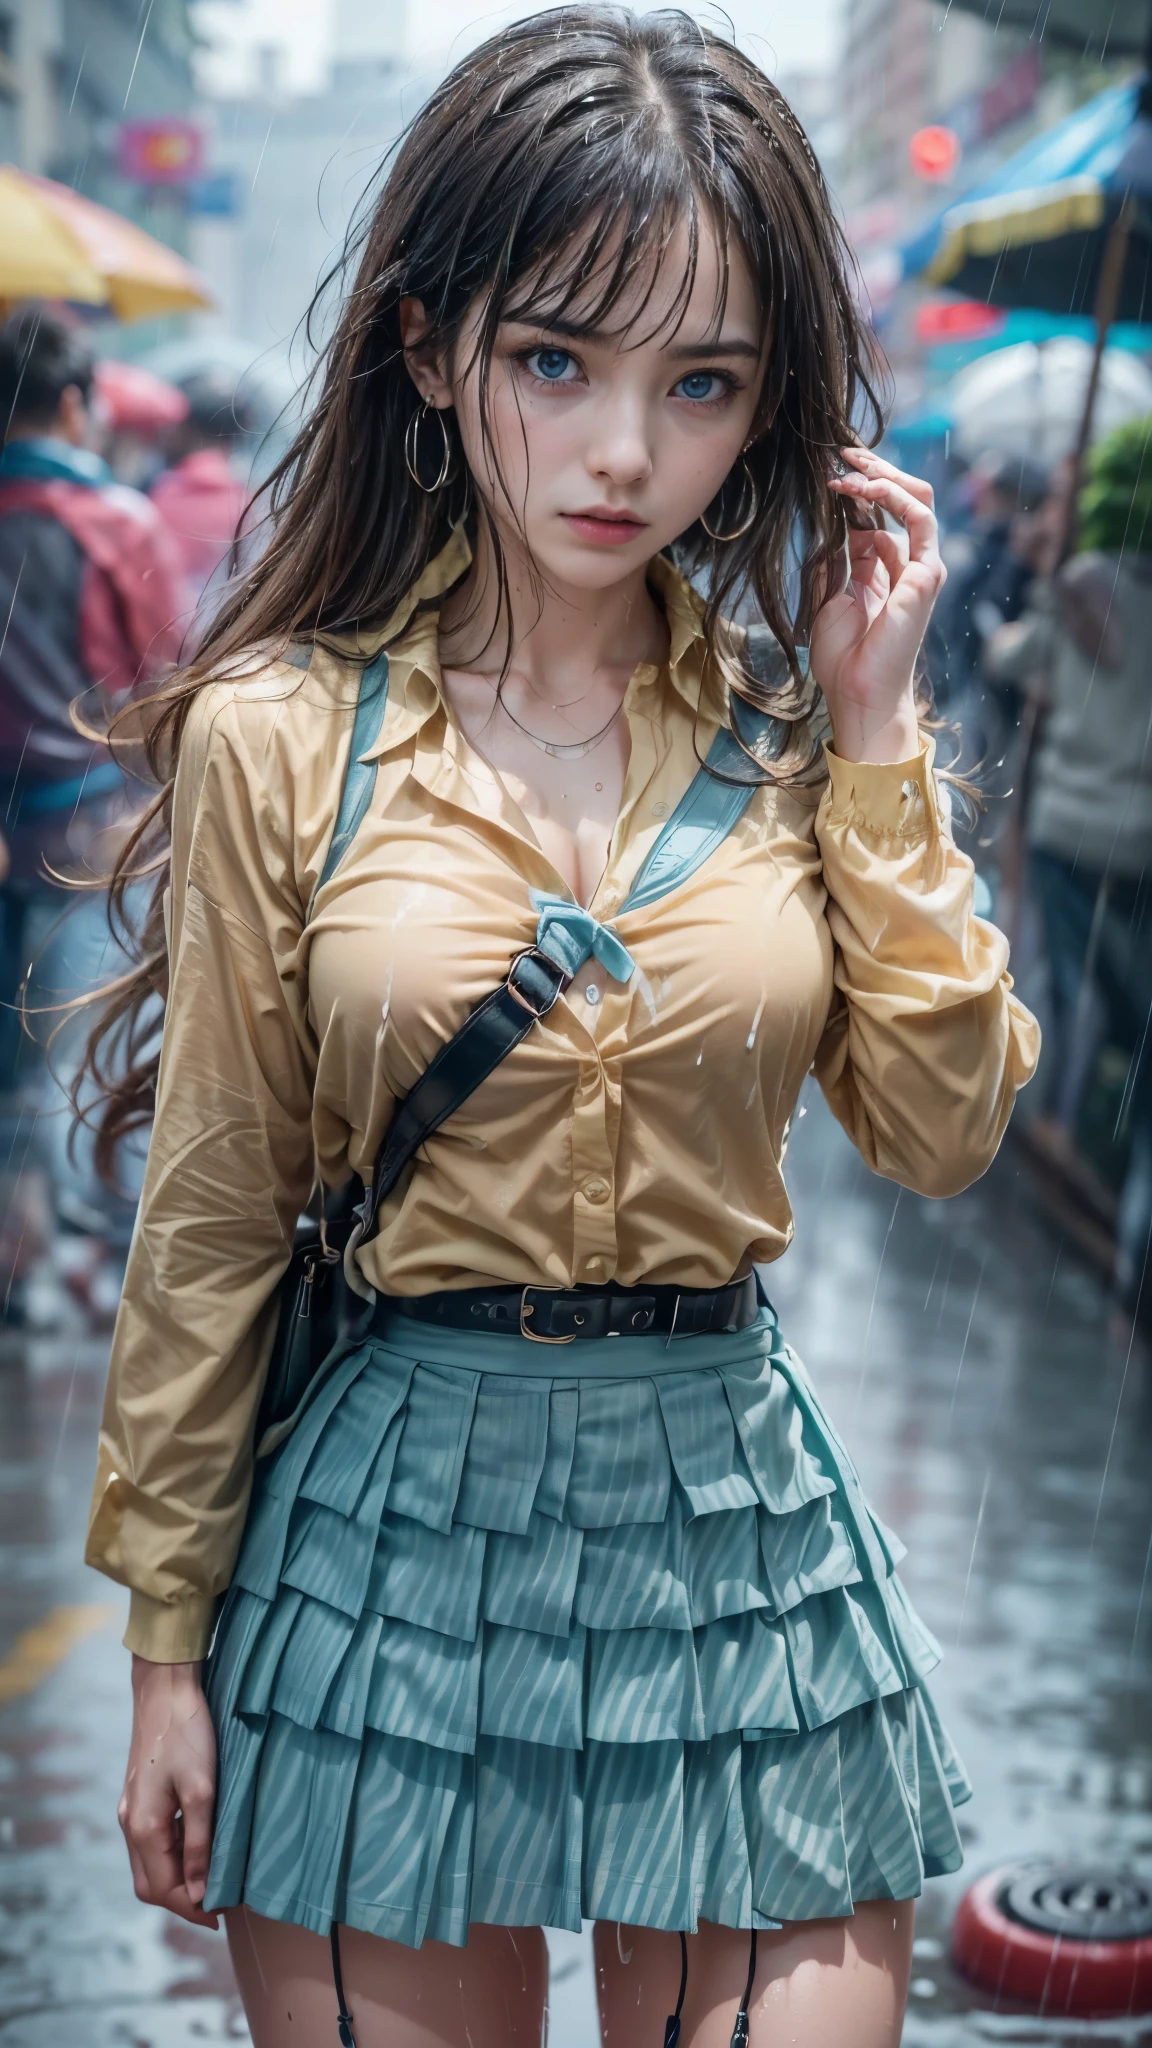 (RAW shooting, Photoreal:1.5, 8K, highest quality, masterpiece, ultra high resolution), perfect dynamic composition:1.2, street corner at night, cry:1.3, (((Typhoon heavy rain))), Highly detailed skin and facial textures:1.2, Slim high school girl wet in the rain:1.3, sexy beauty:1.1, perfect style:1.2, beautiful and aesthetic:1.1, Fair skin, very beautiful face, water droplets on the skin, (rain drips all over my body:1.2, wet body, wet hair:1.4, wet uniformスカート:1.2, wet uniform:1.3), belt, (Medium chest, Bra is sheer, Chest gap), (expression of sadness, lovelorn, The expression on your face when you feel intense caress, Facial expression when feeling pleasure), (beautiful blue eyes, Eyes that feel beautiful eros:0.8), (Too erotic:0.9, Bewitching:0.9), cowboy shot, shoulder bag, earrings, bracelet, clock